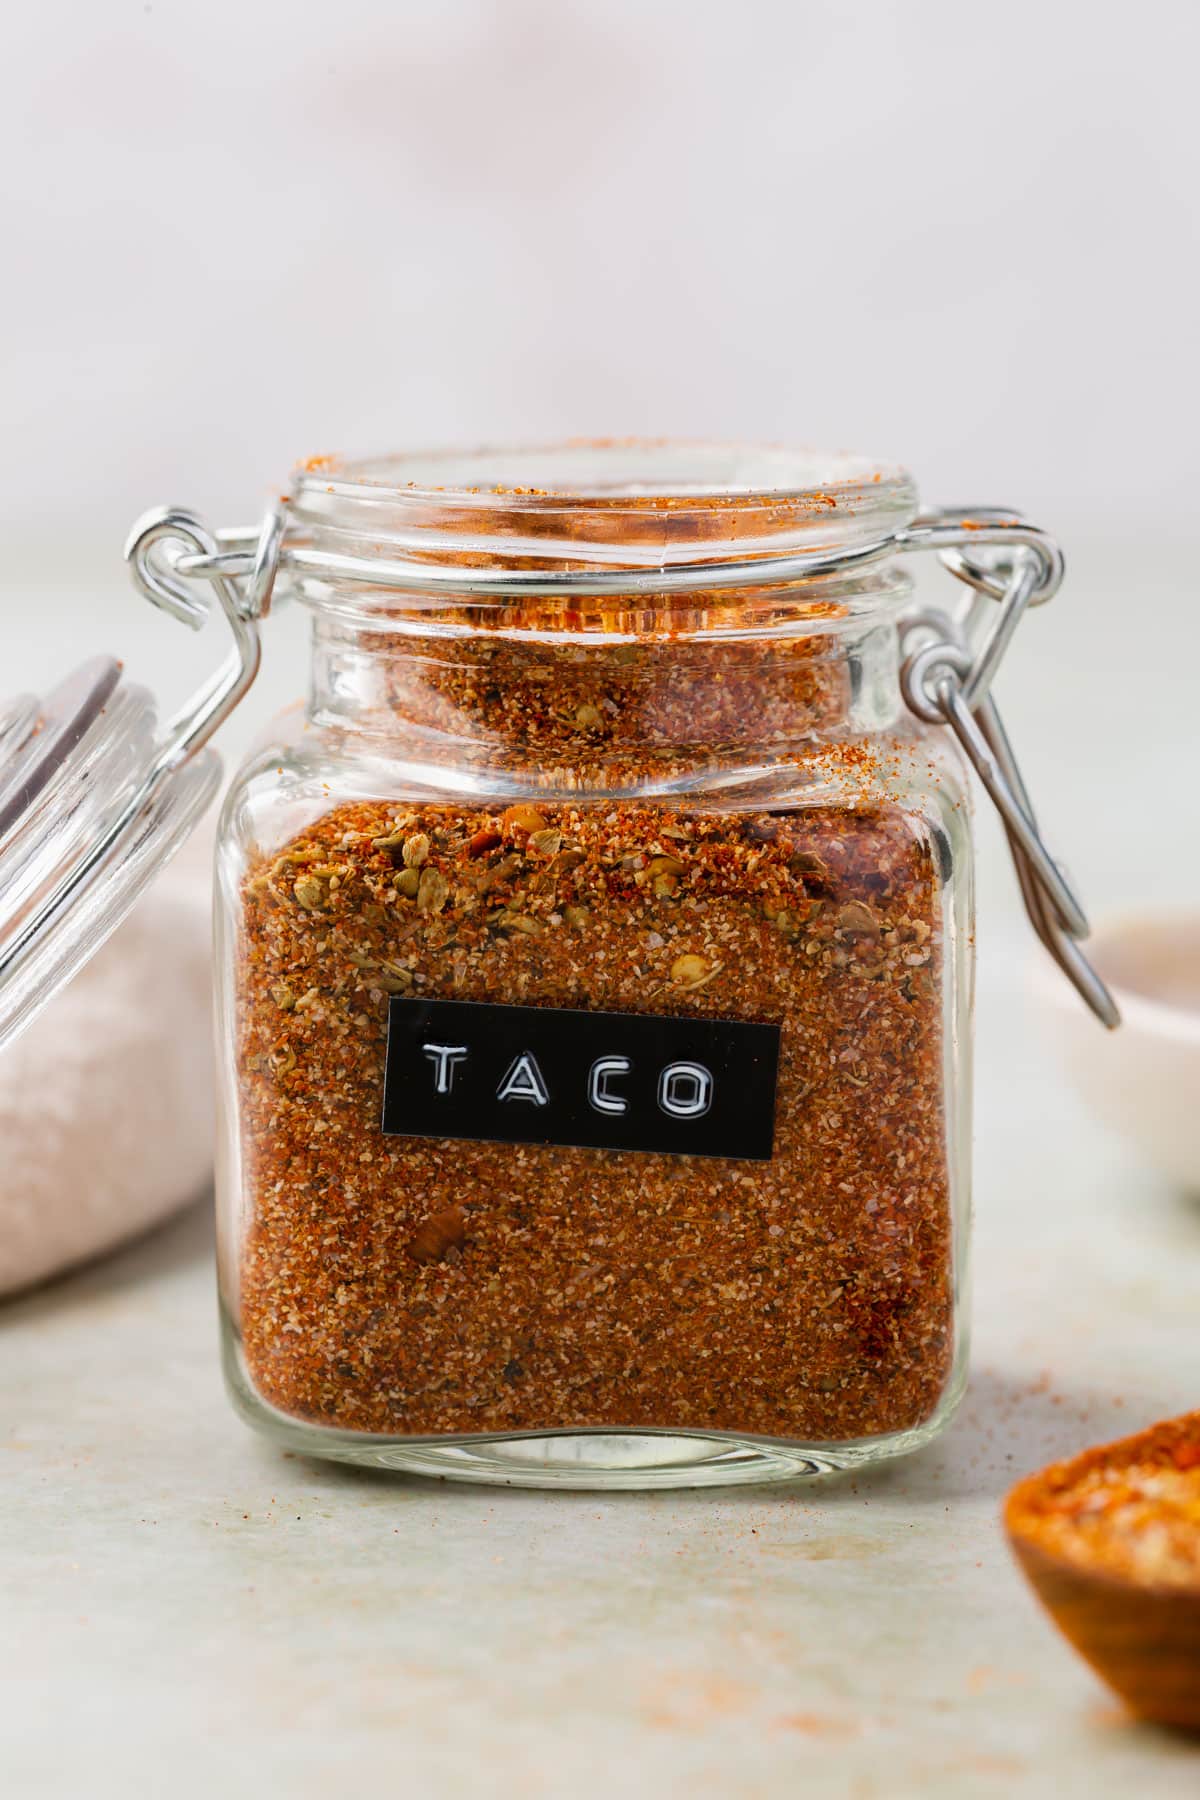 Gluten-free taco seasoning in a glass jar with a black and white label that says "taco" on it.